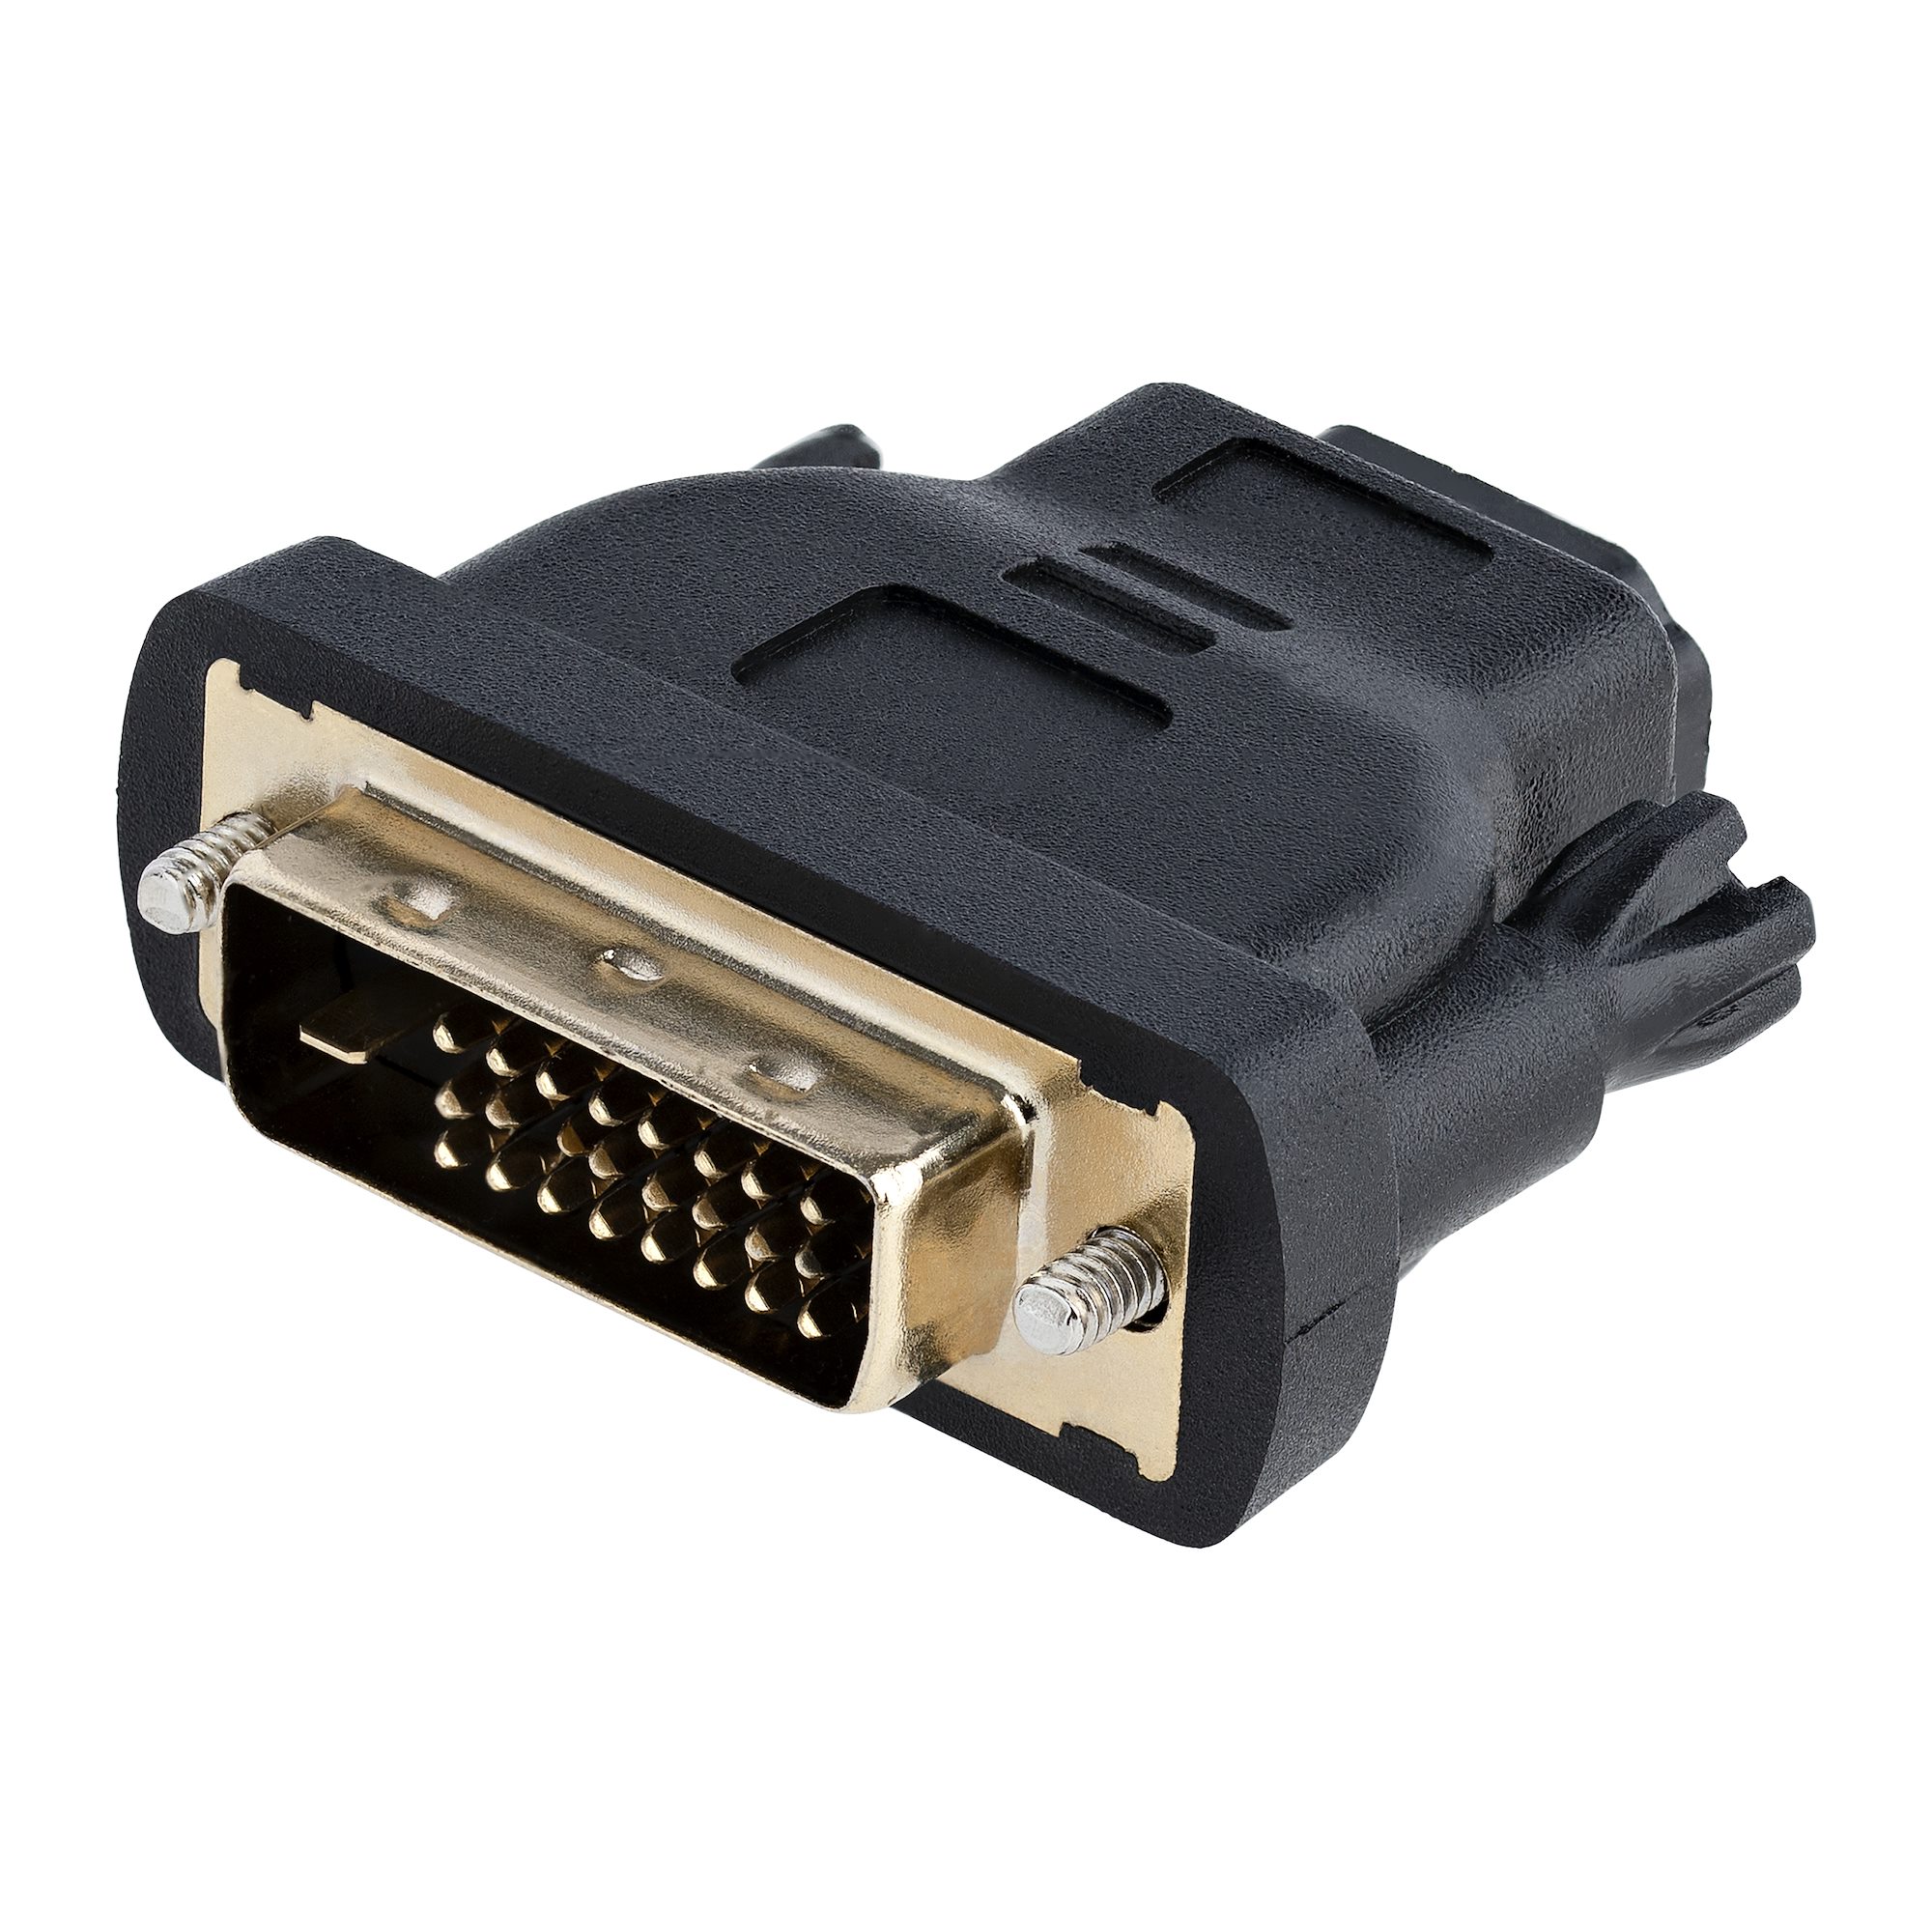 HDMIВ® to DVI-D Video Cable Adapter F/M HDMIВ®г‚±гѓјгѓ–гѓ« HDMIг‚ўгѓЂгѓ—г‚ї  ж—Ґжњ¬